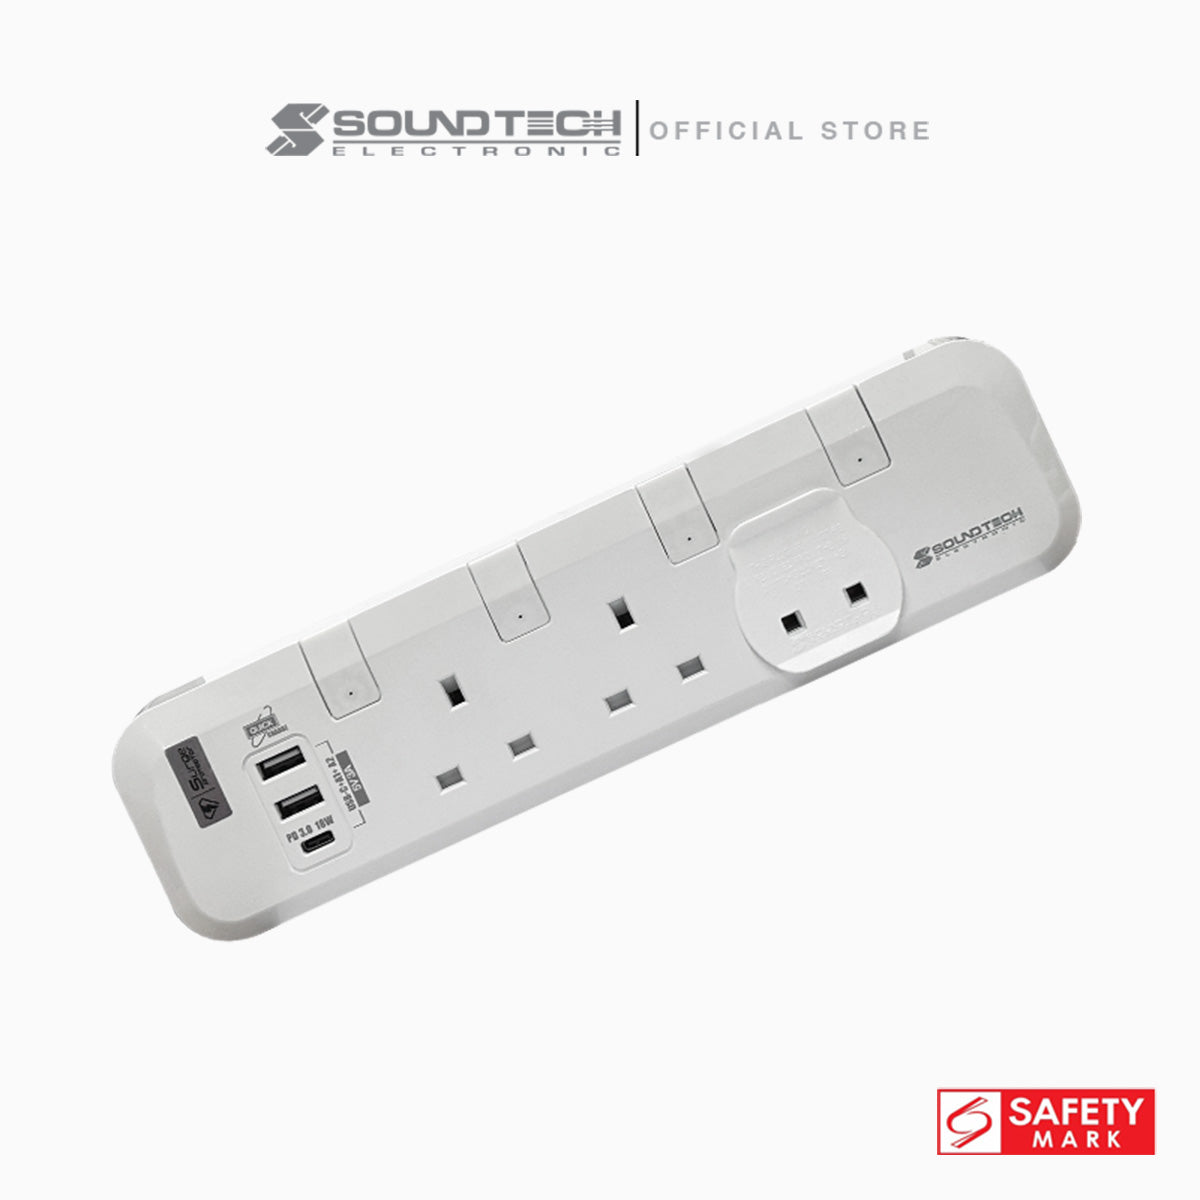 3Way 3M USB A+C Quick Charger Power Strip With Surge Protection